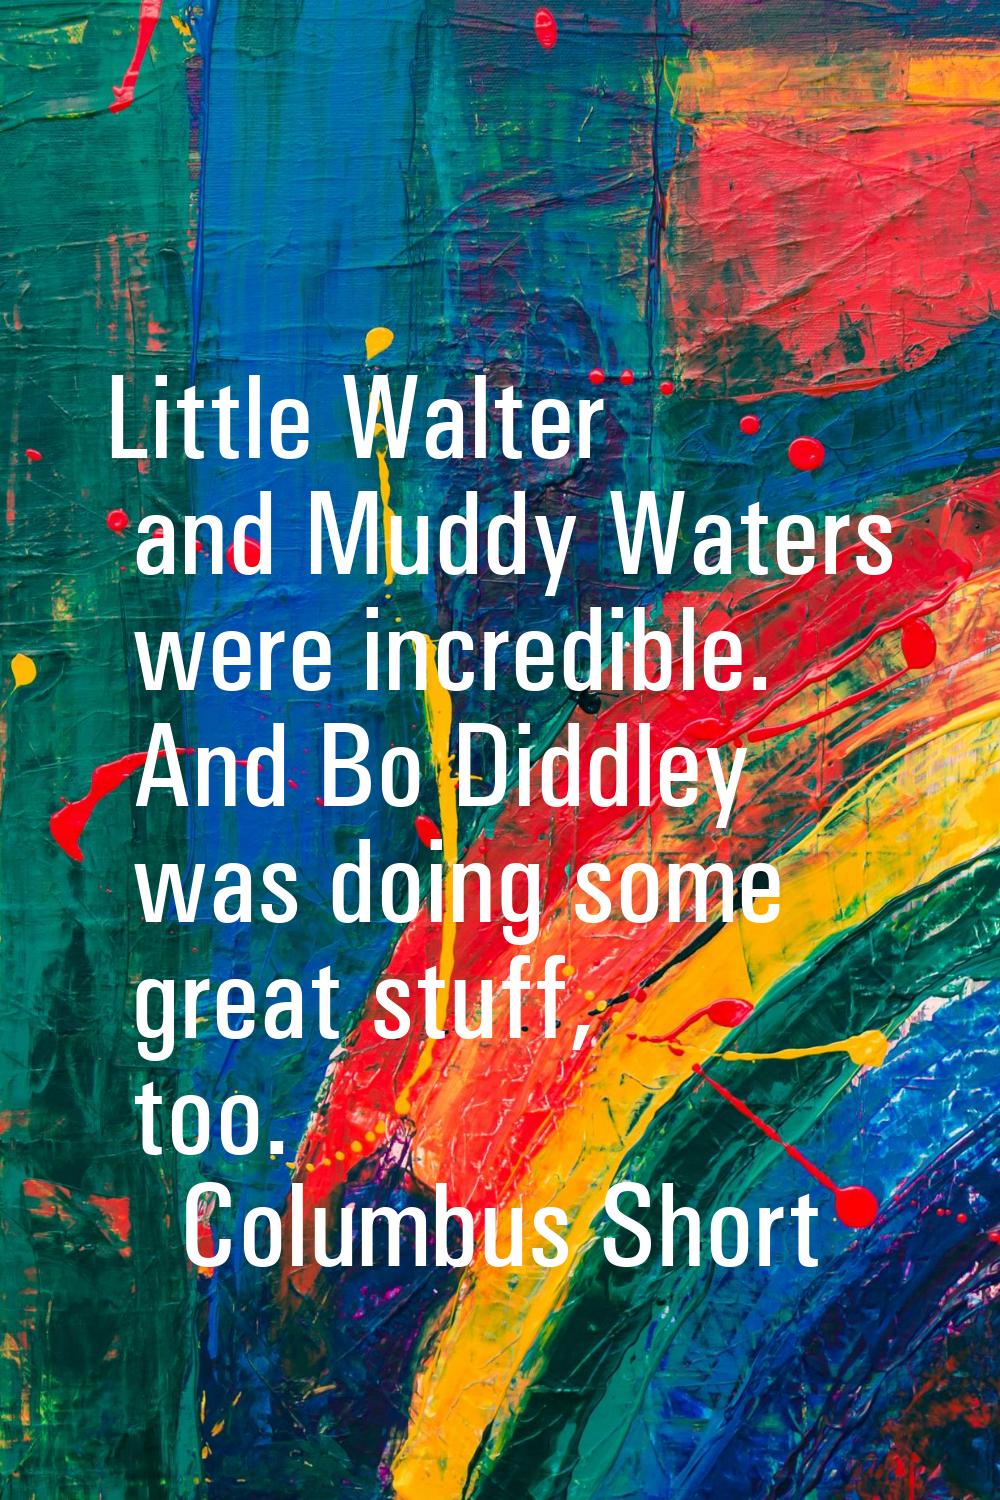 Little Walter and Muddy Waters were incredible. And Bo Diddley was doing some great stuff, too.